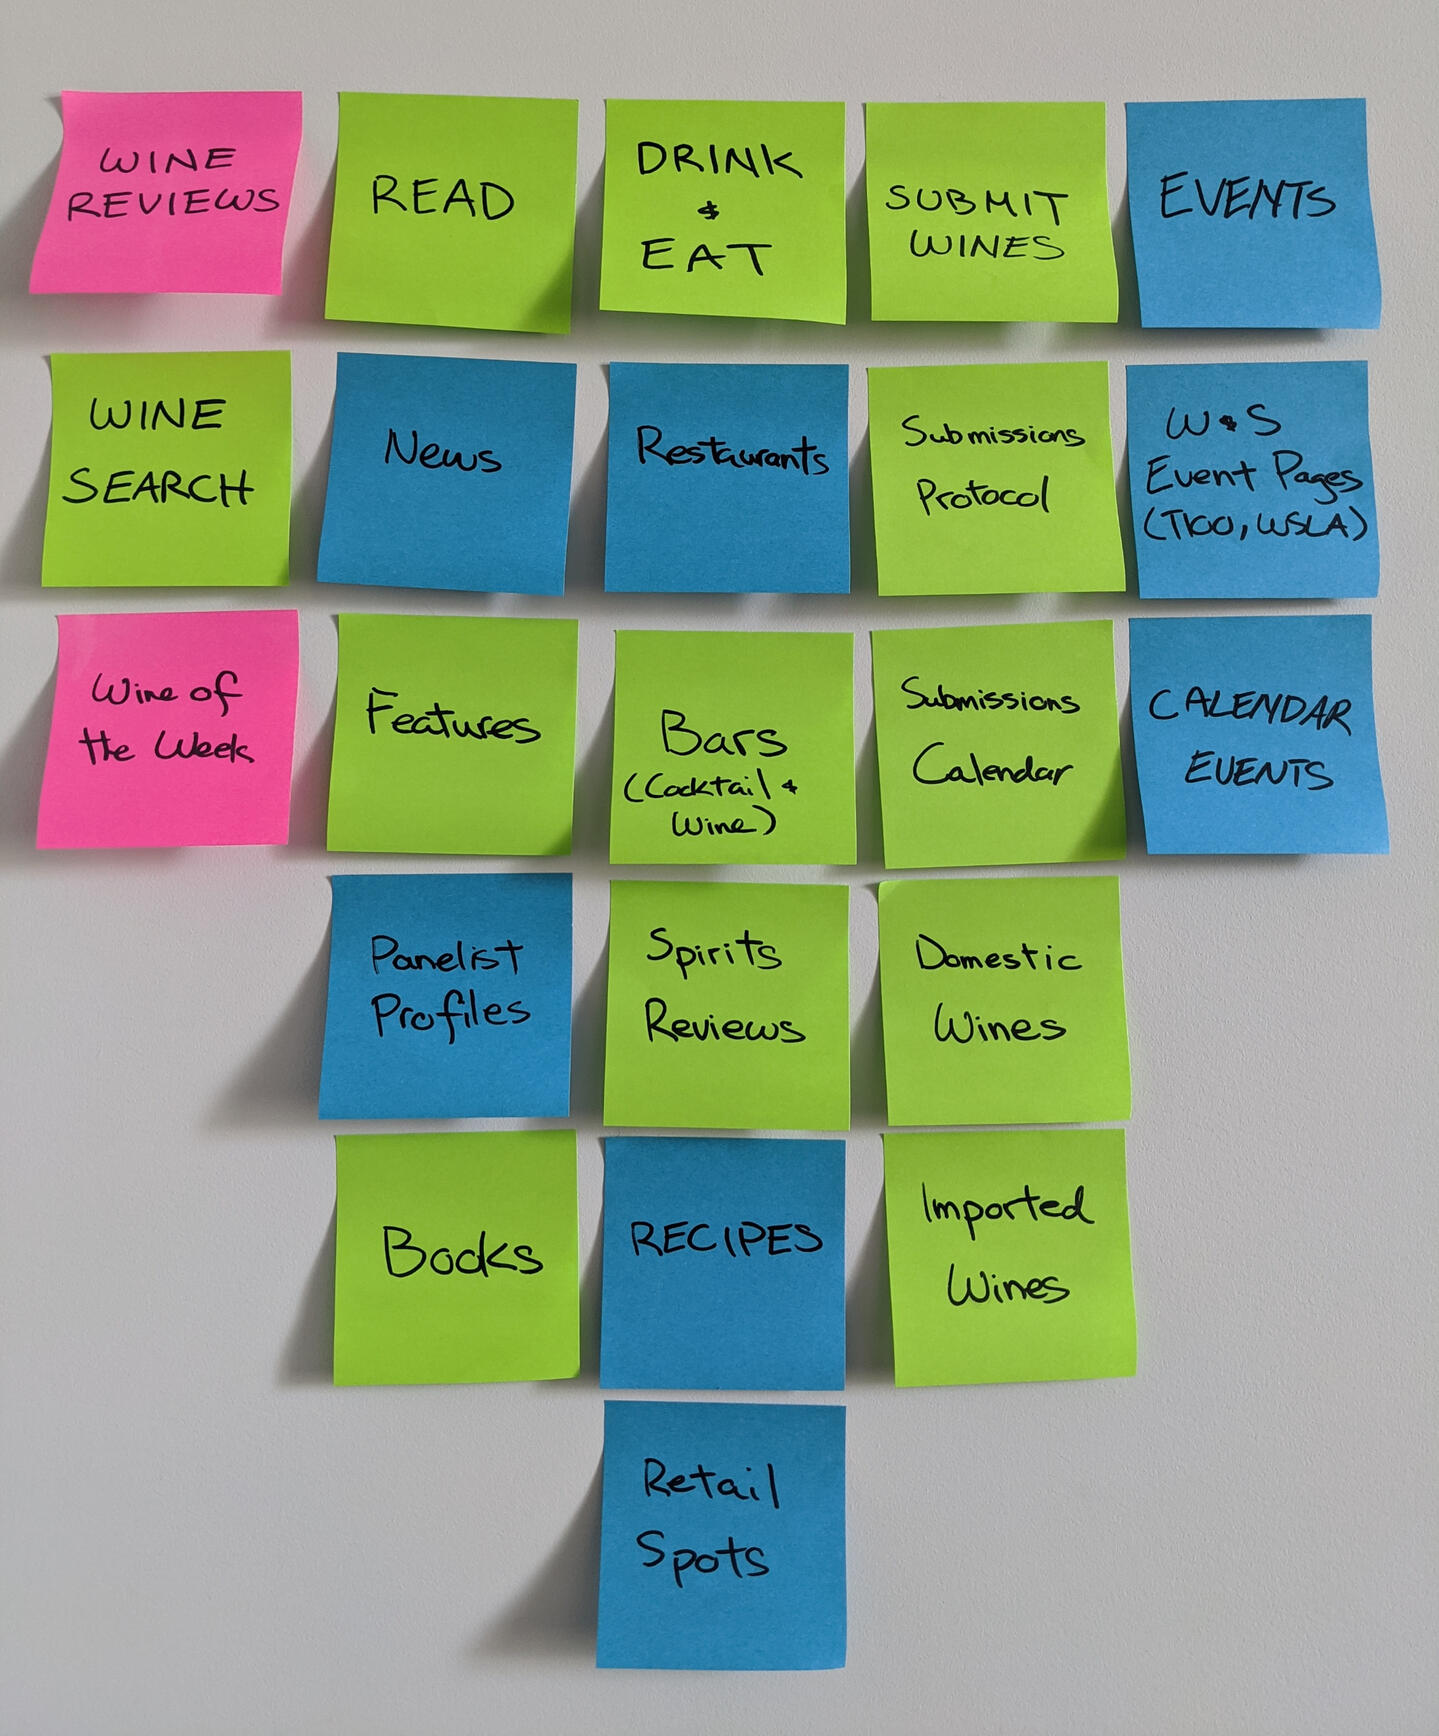 Post-its in reorganizing the website's navigation